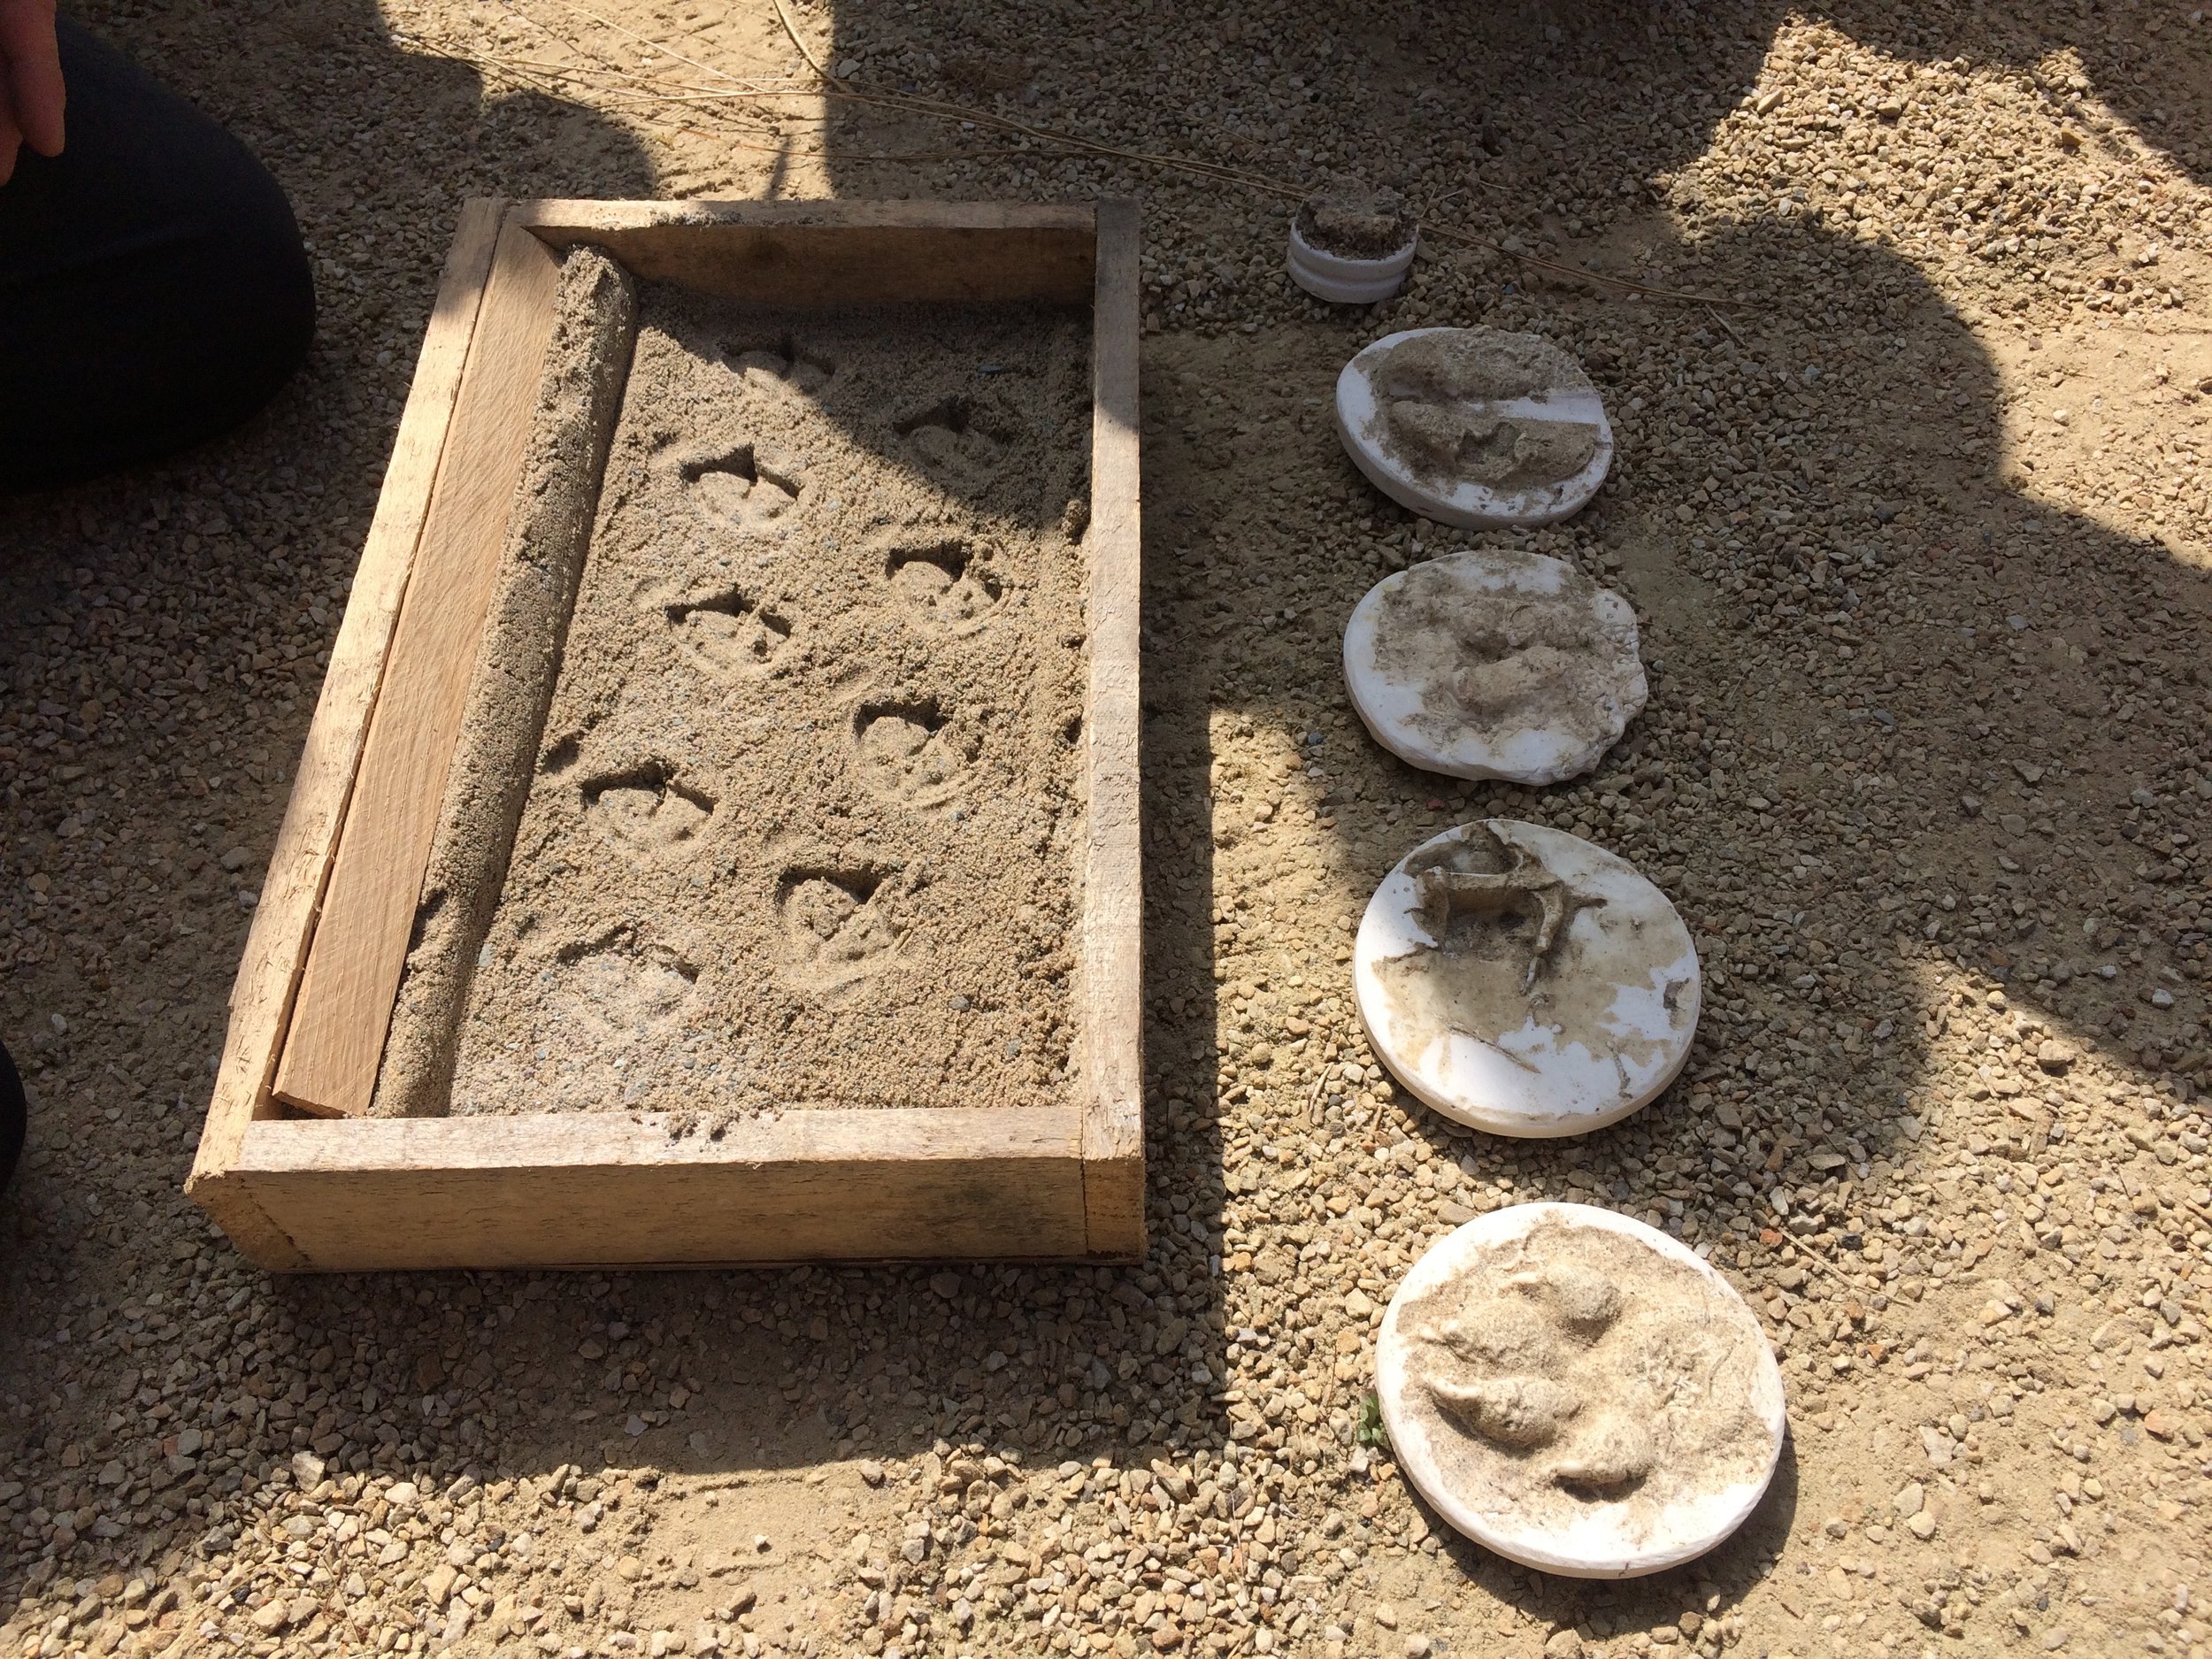  Superfolk had made casts of the animal prints they found close to their studio in Mayo. They used these to make animal prints in sand, and hid them throughout the garden for the children to discover.... 